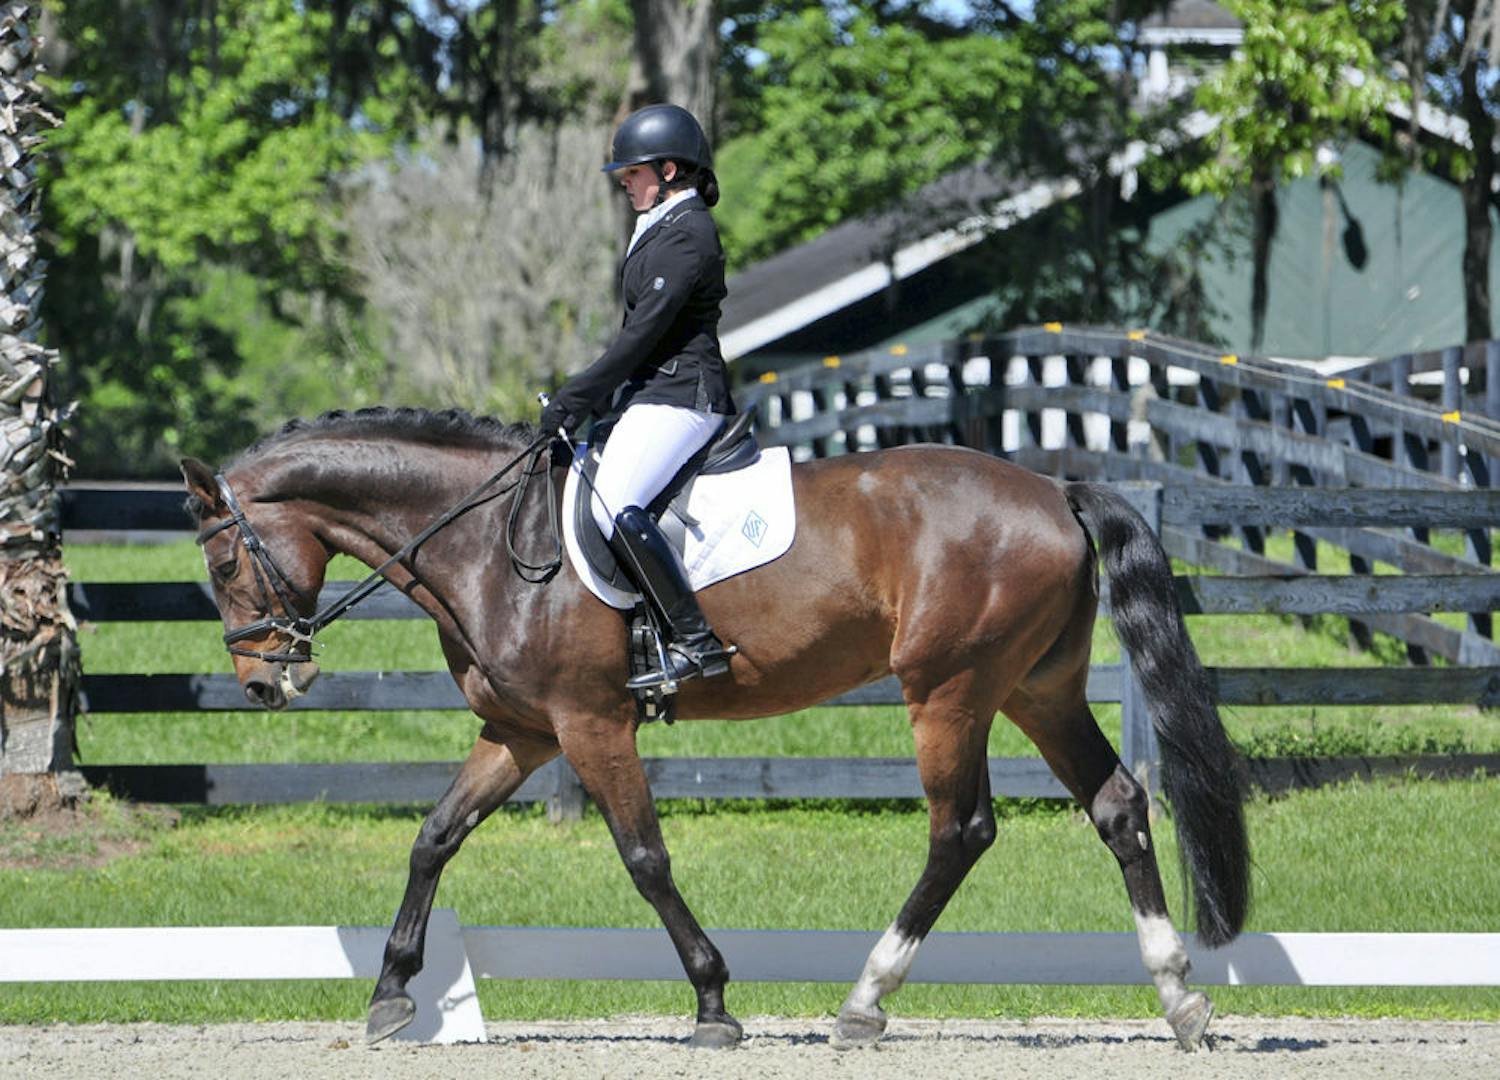 Alexis Rossetti, a 19-year-old UF political science and international studies sophomore, is one of five UF students who will compete in the Intercollegiate Dressage Association’s 2016 National Championship in New Jersey on Saturday and Sunday.